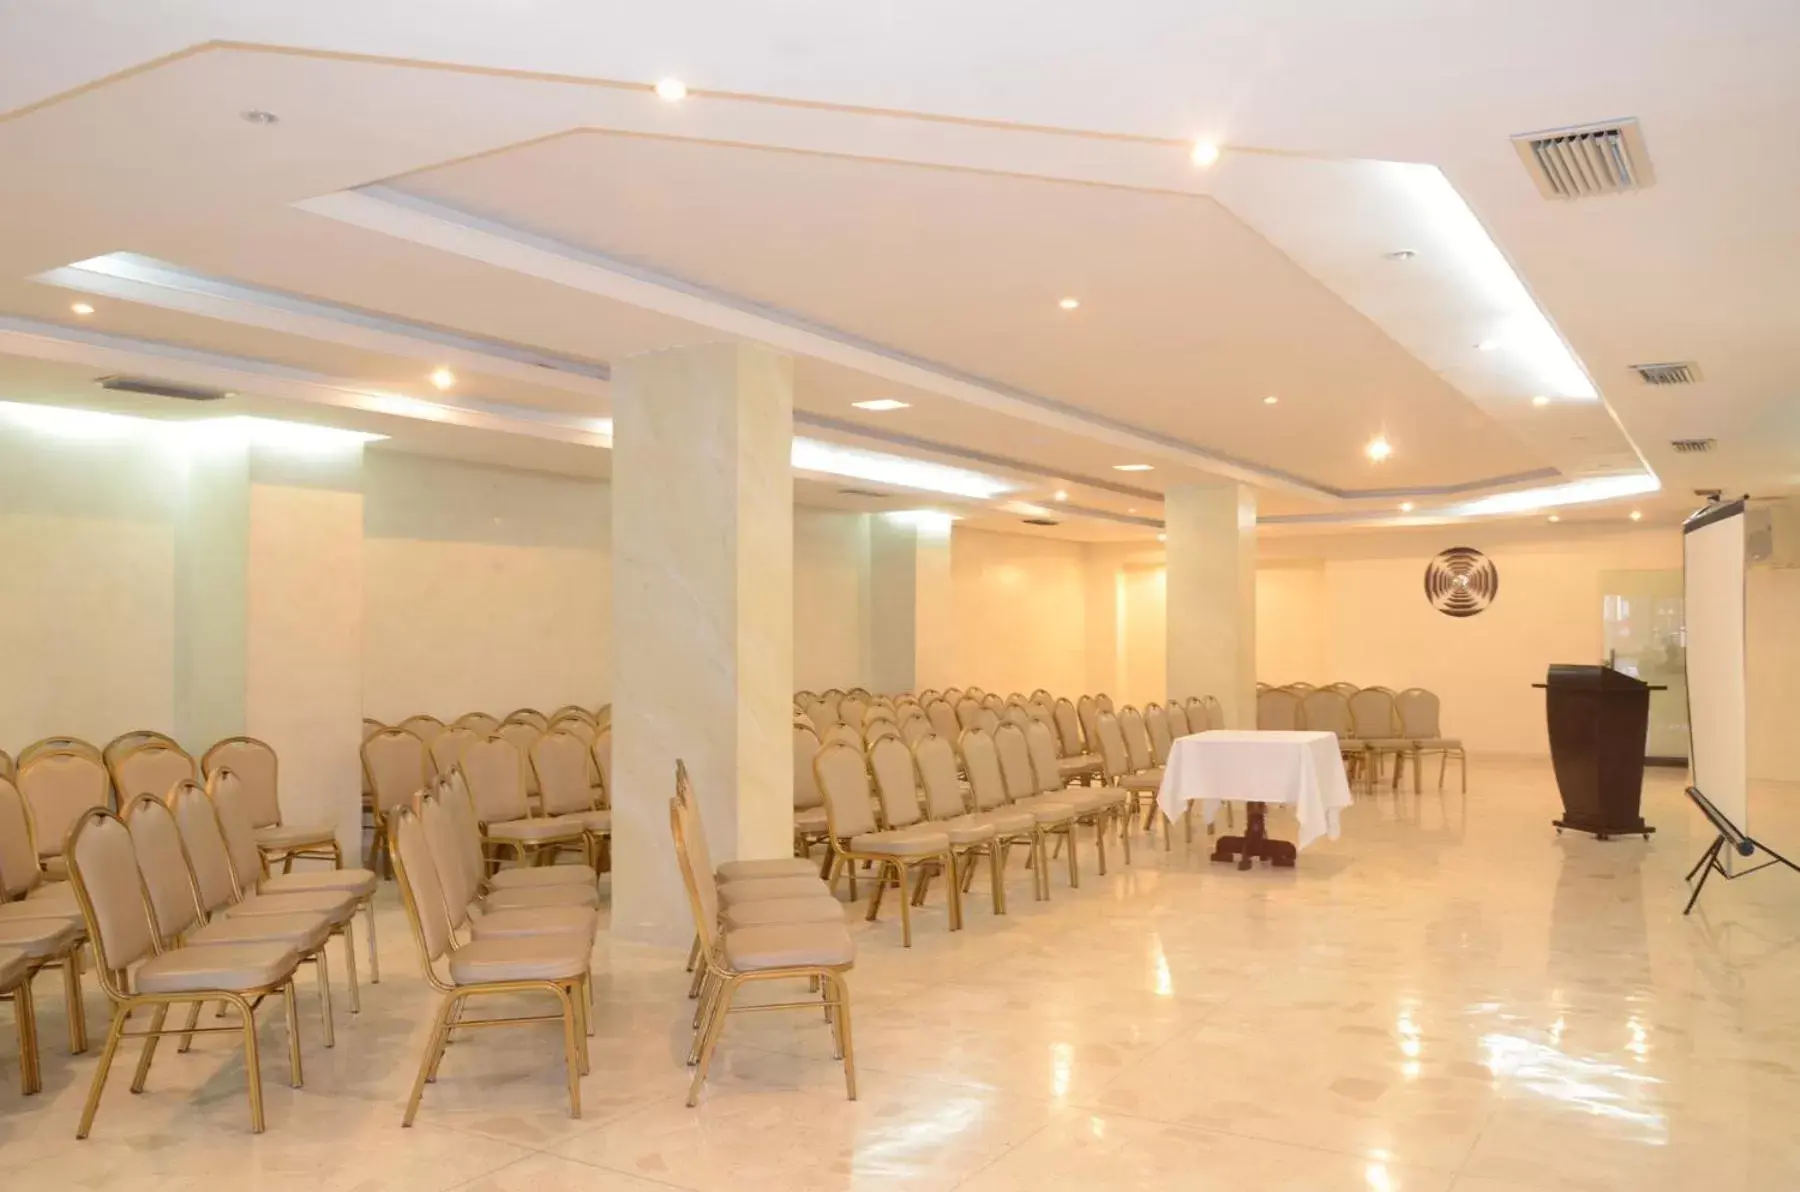 Place of worship, Banquet Facilities in Hotel Intersuites